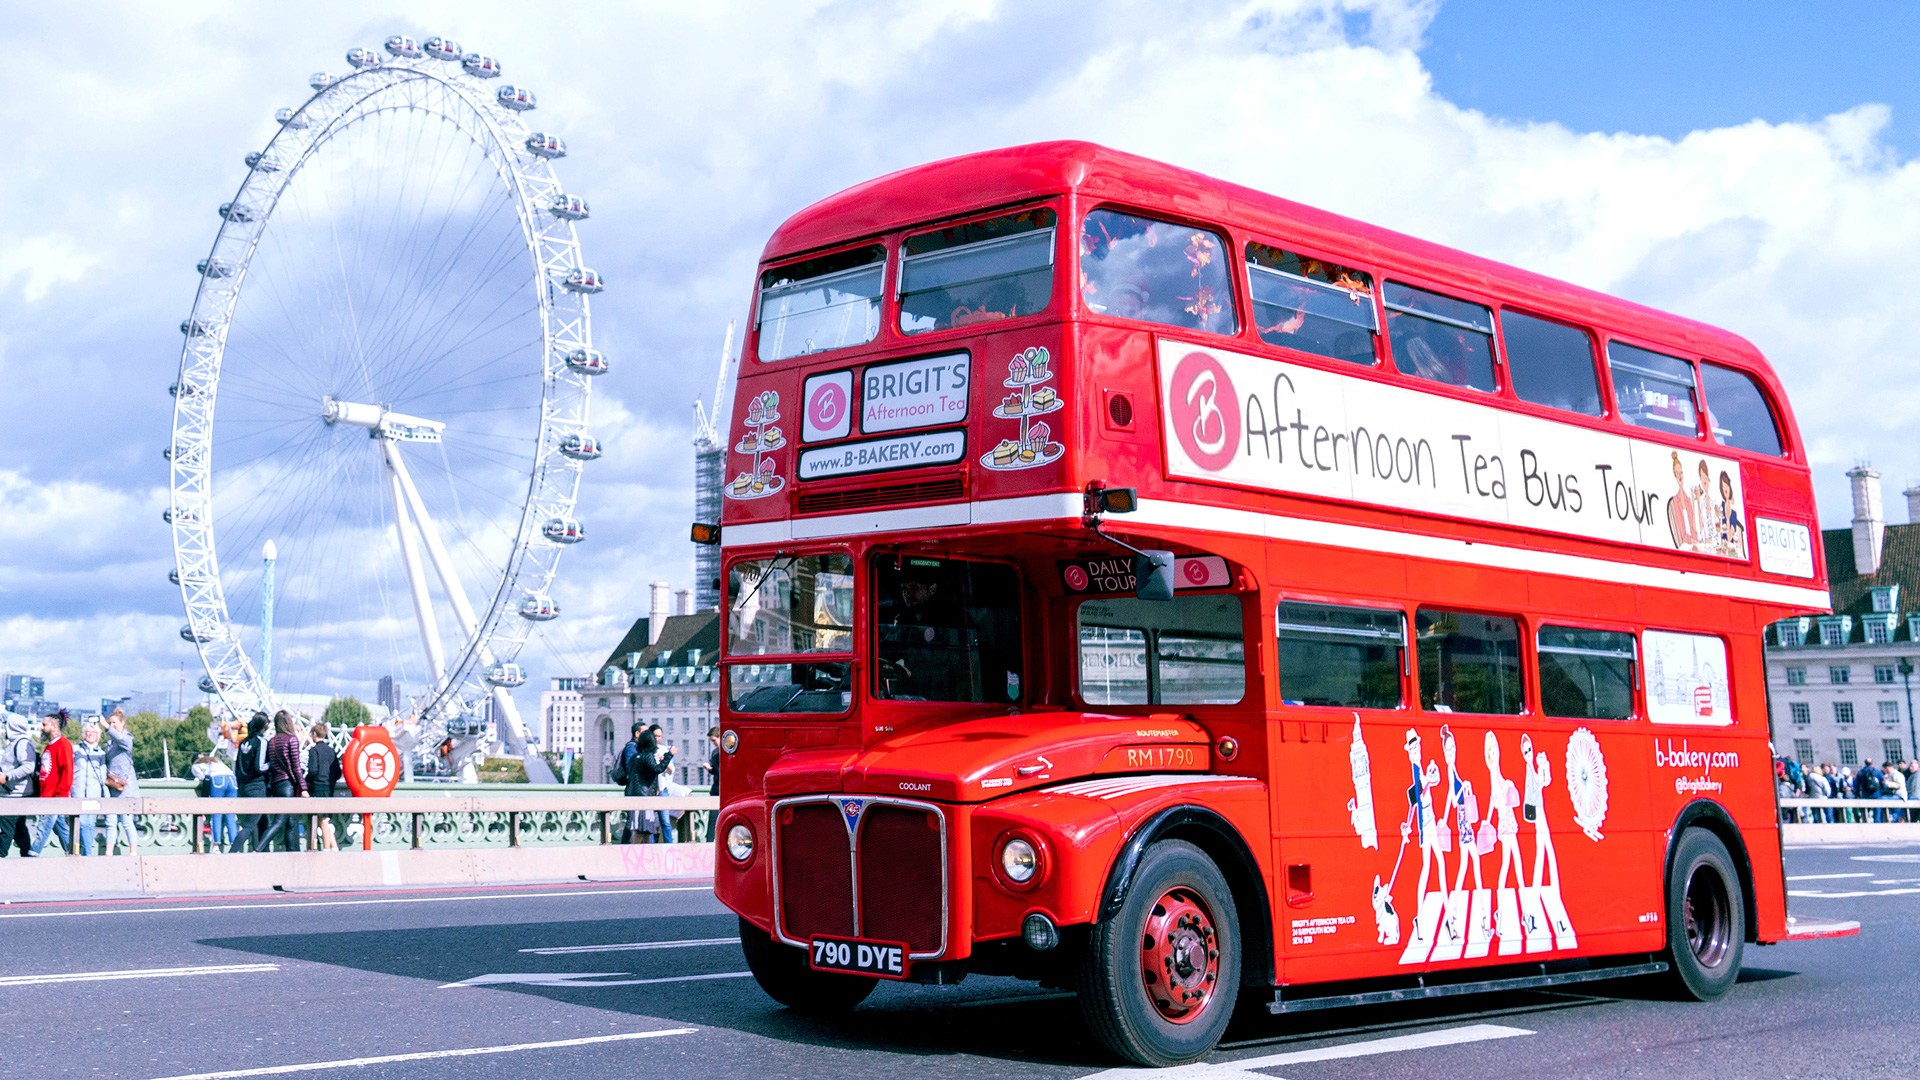 The red double decker London bus on the road